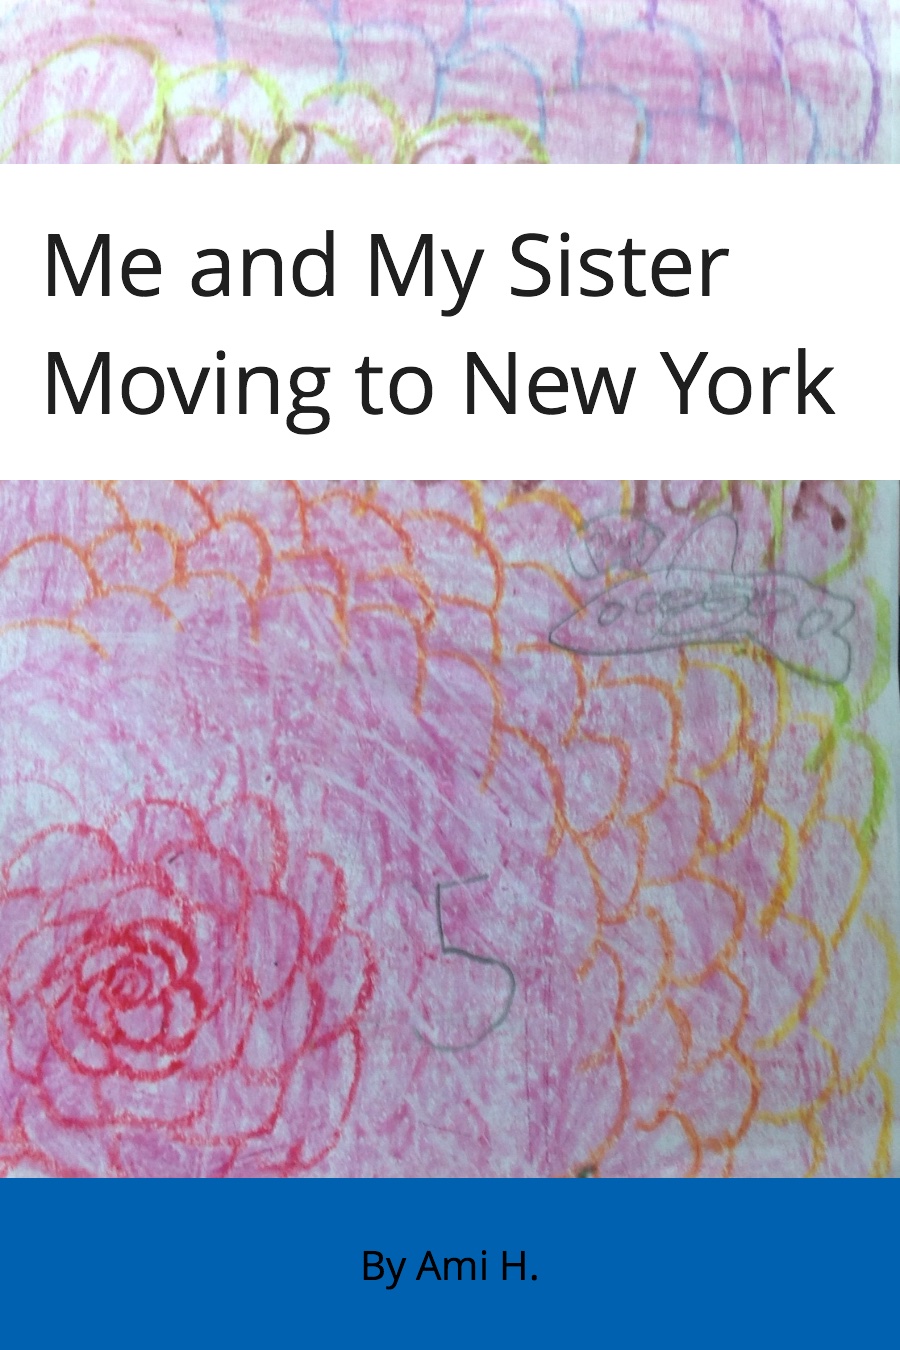 Me and My Sister Moving to New York by Ami H